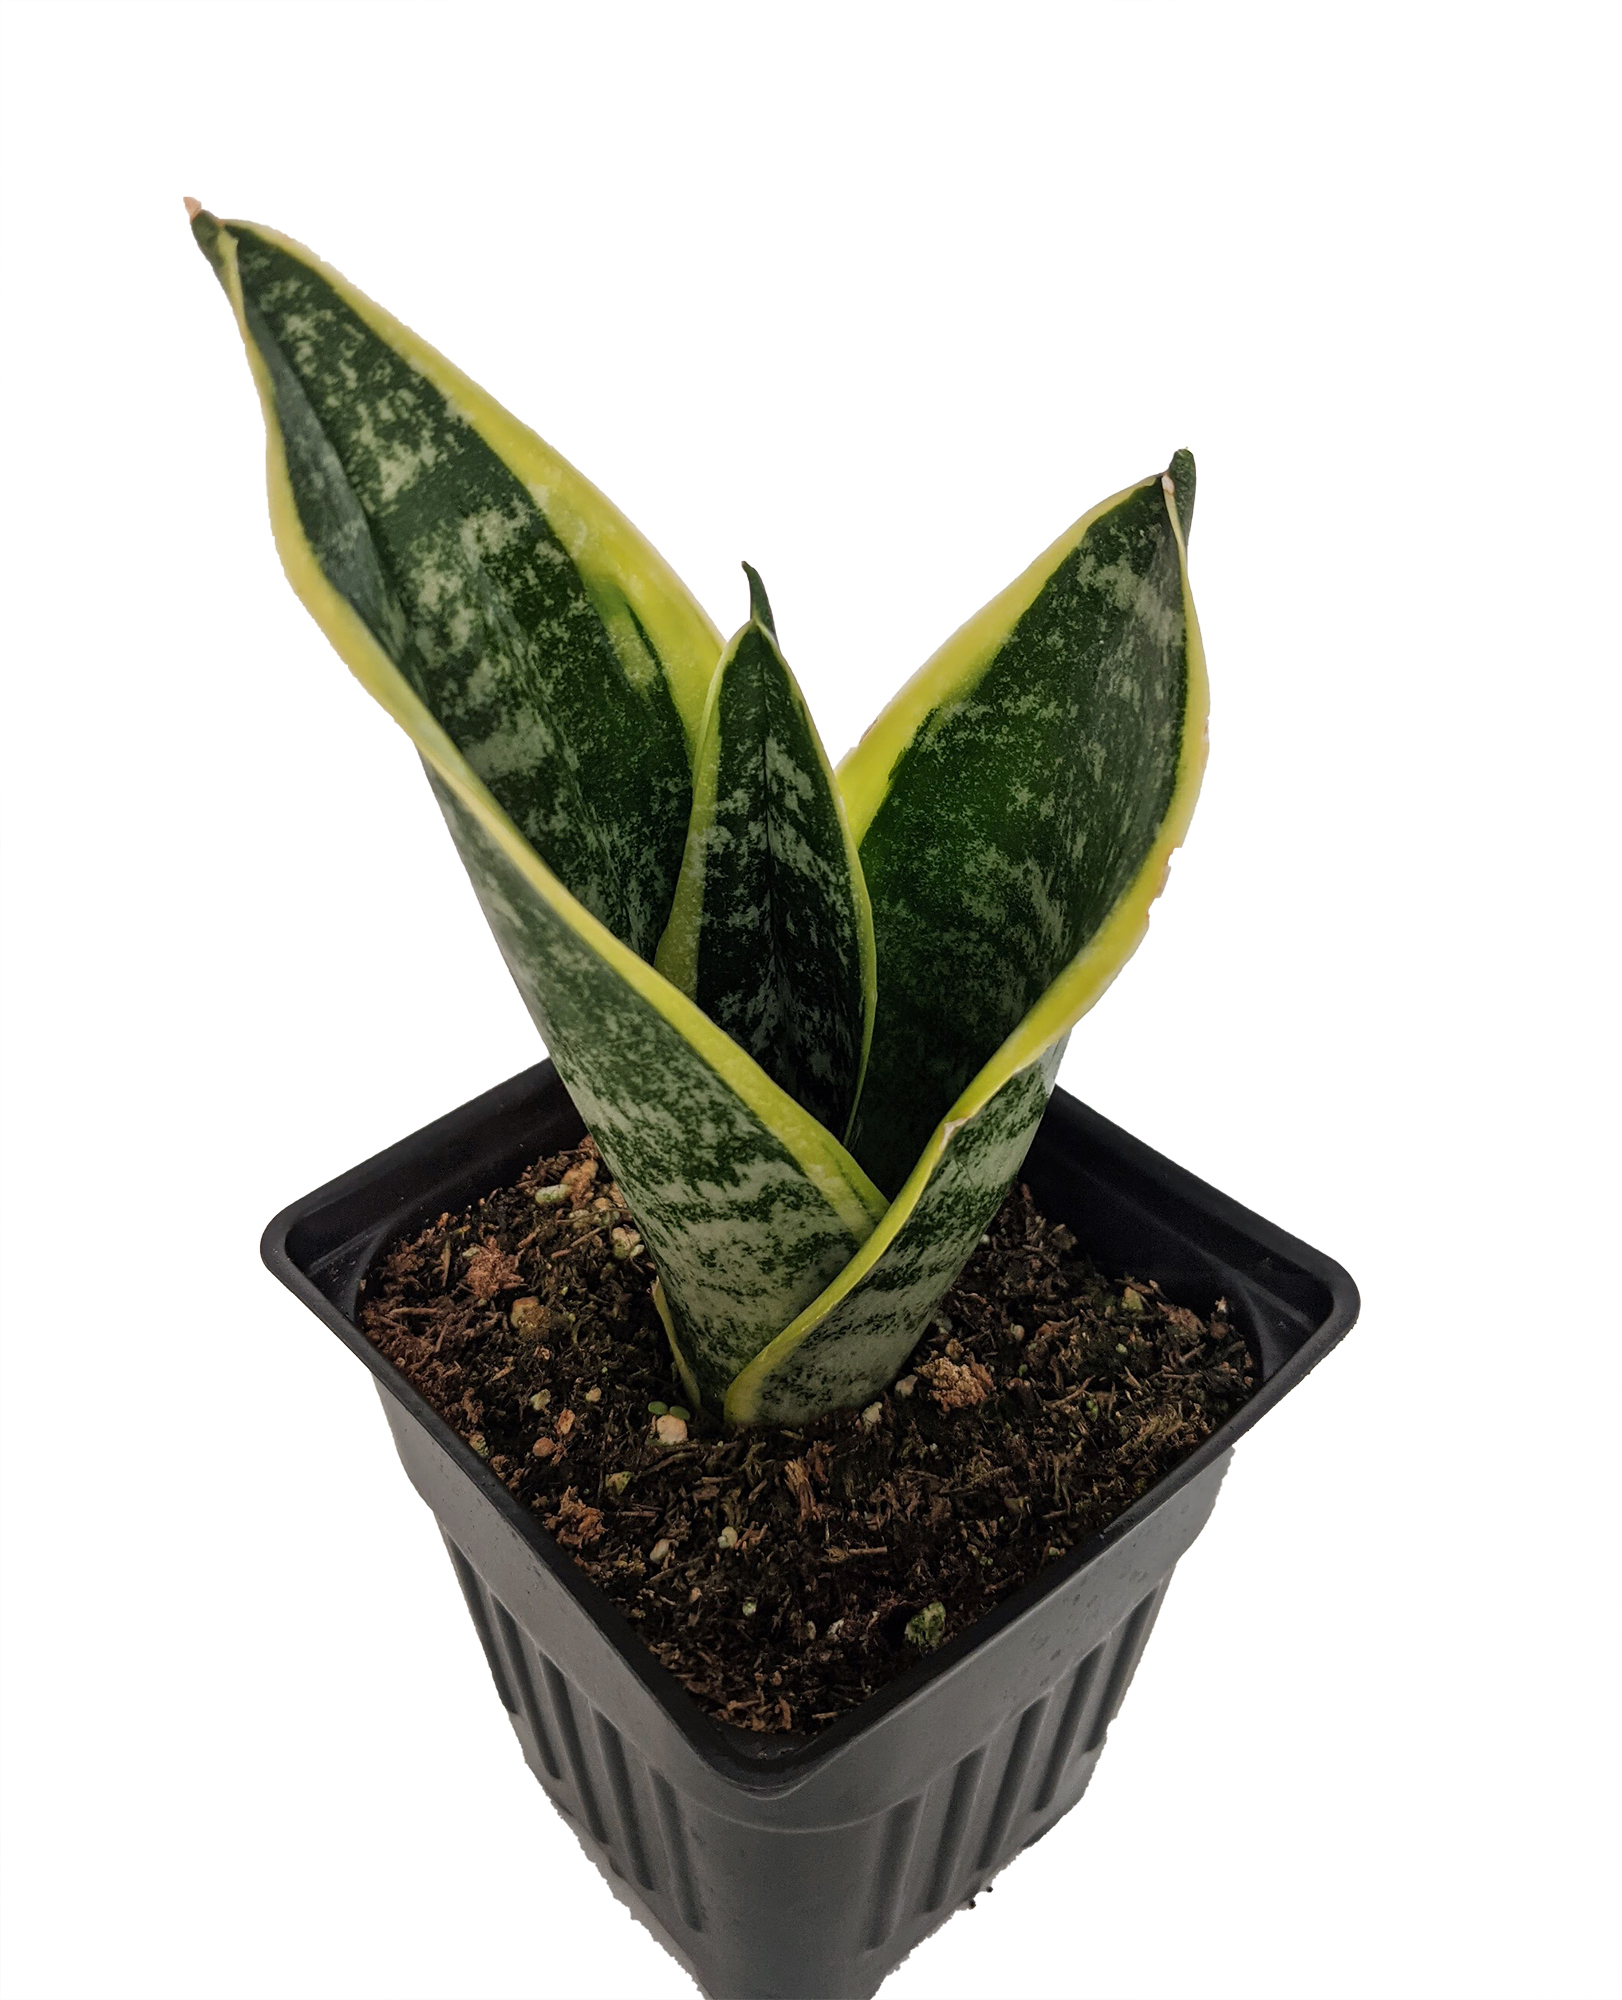 Superba Snake Plant - Sanseveria - Almost Impossible to kill - 4" Pot - image 1 of 4